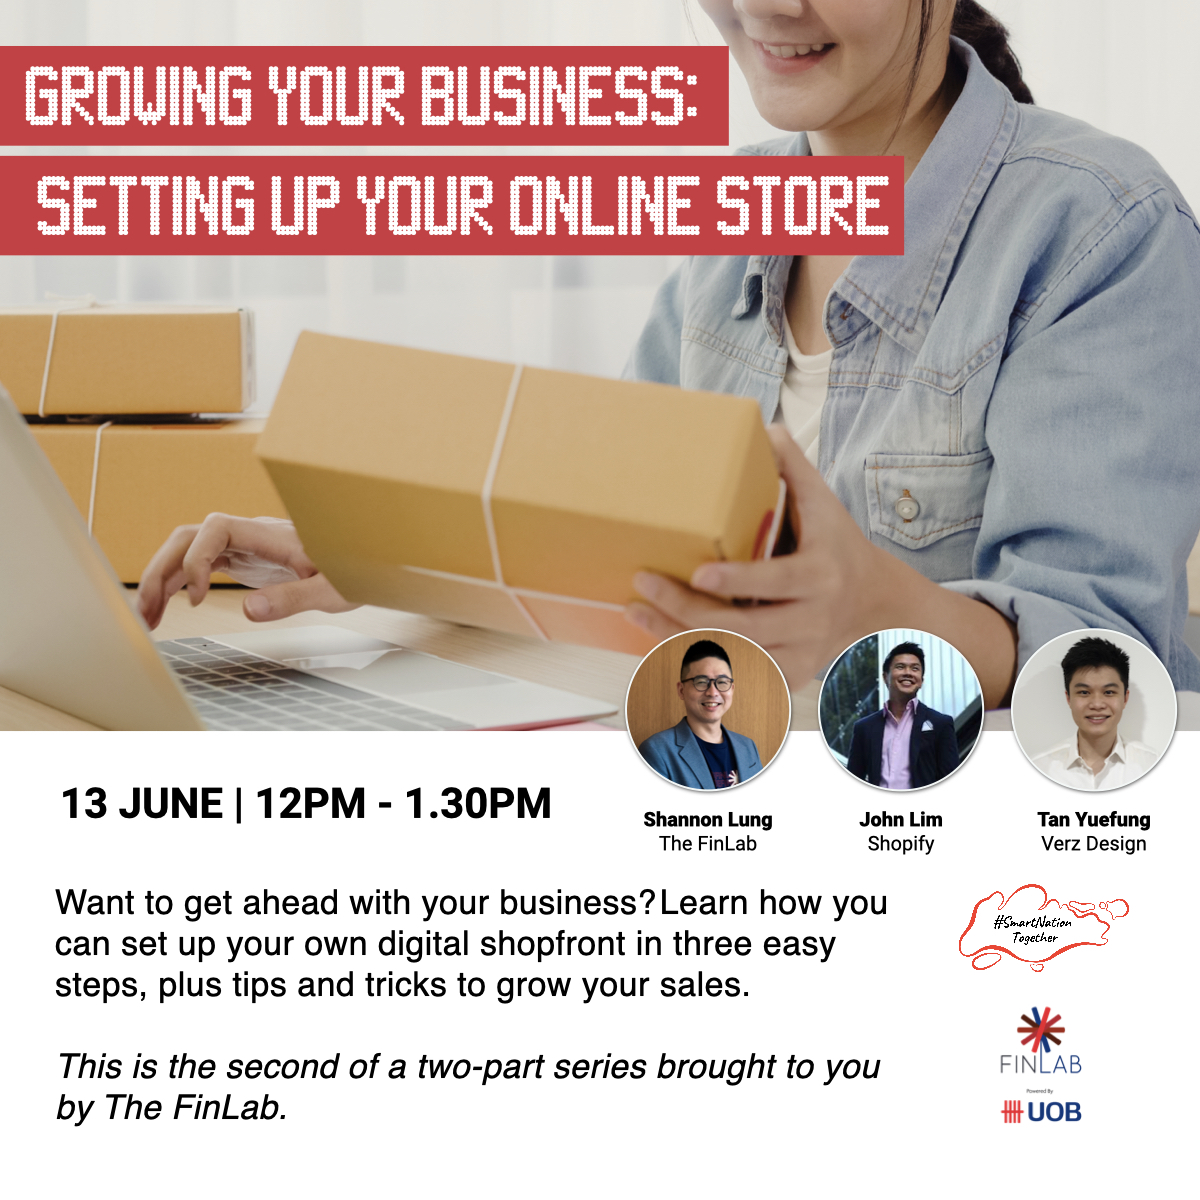 Free webinar for working adults on e-commerce